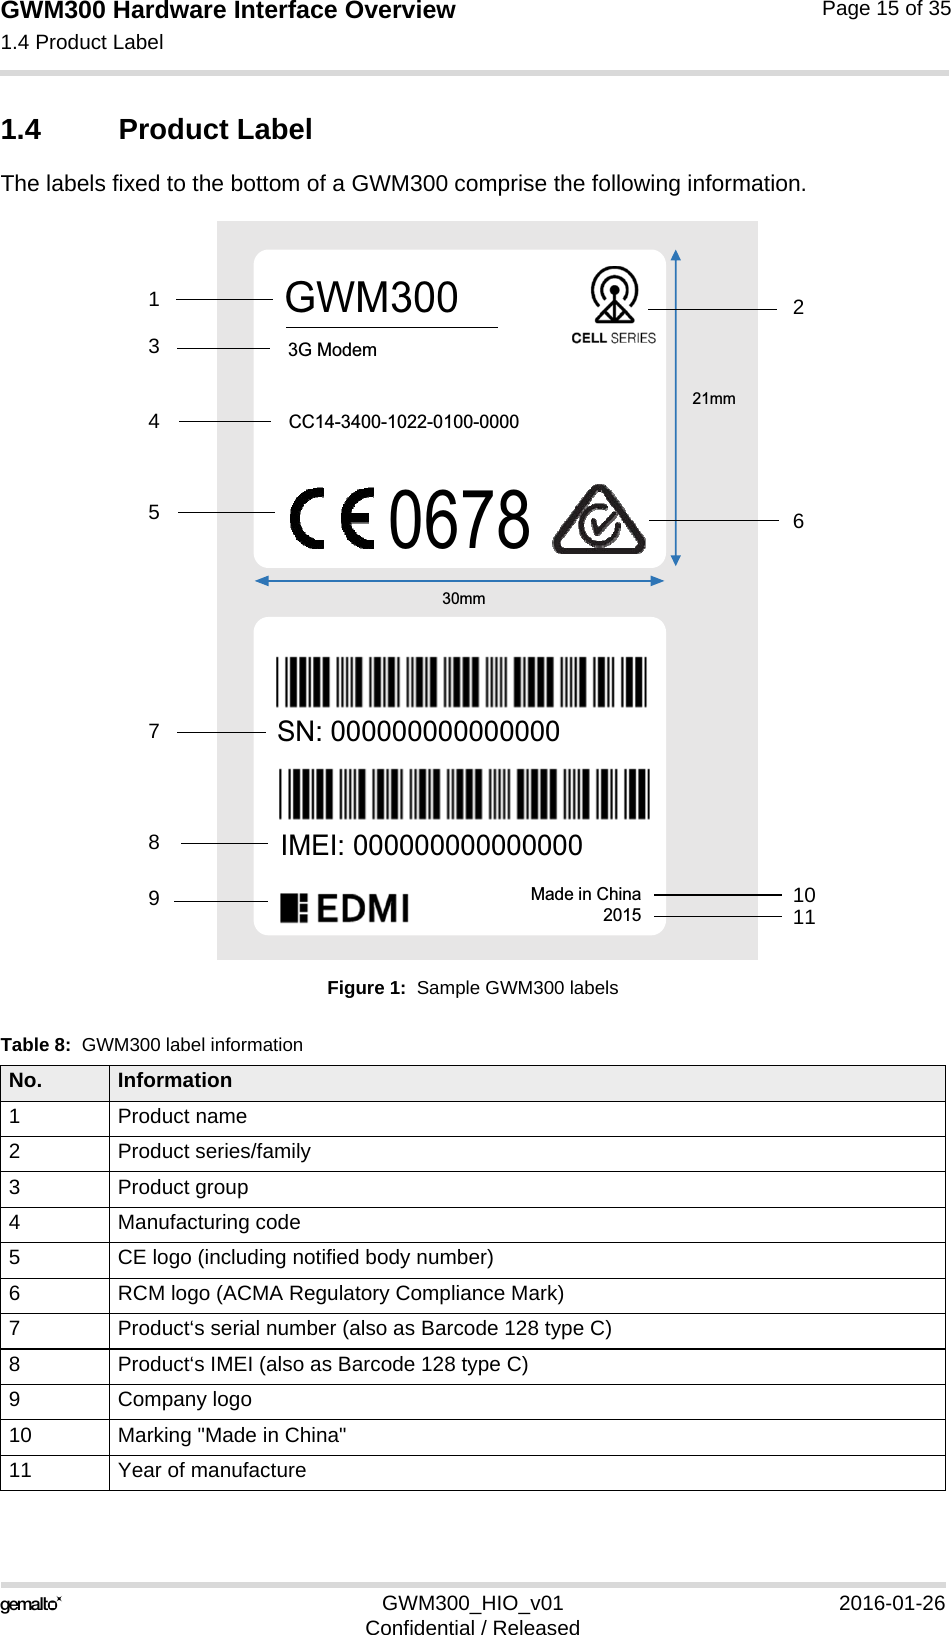 GWM300 Hardware Interface Overview1.4 Product Label15GWM300_HIO_v01 2016-01-26Confidential / ReleasedPage 15 of 351.4 Product LabelThe labels fixed to the bottom of a GWM300 comprise the following information.Figure 1:  Sample GWM300 labels Table 8:  GWM300 label informationNo. Information1 Product name2 Product series/family3 Product group4 Manufacturing code5 CE logo (including notified body number)6 RCM logo (ACMA Regulatory Compliance Mark)7 Product‘s serial number (also as Barcode 128 type C)8 Product‘s IMEI (also as Barcode 128 type C)9 Company logo10 Marking &quot;Made in China&quot;11 Year of manufacture*:0*0RGHP0DGHLQ&amp;KLQD,0(,61&amp;&amp;PPPP1345267891011